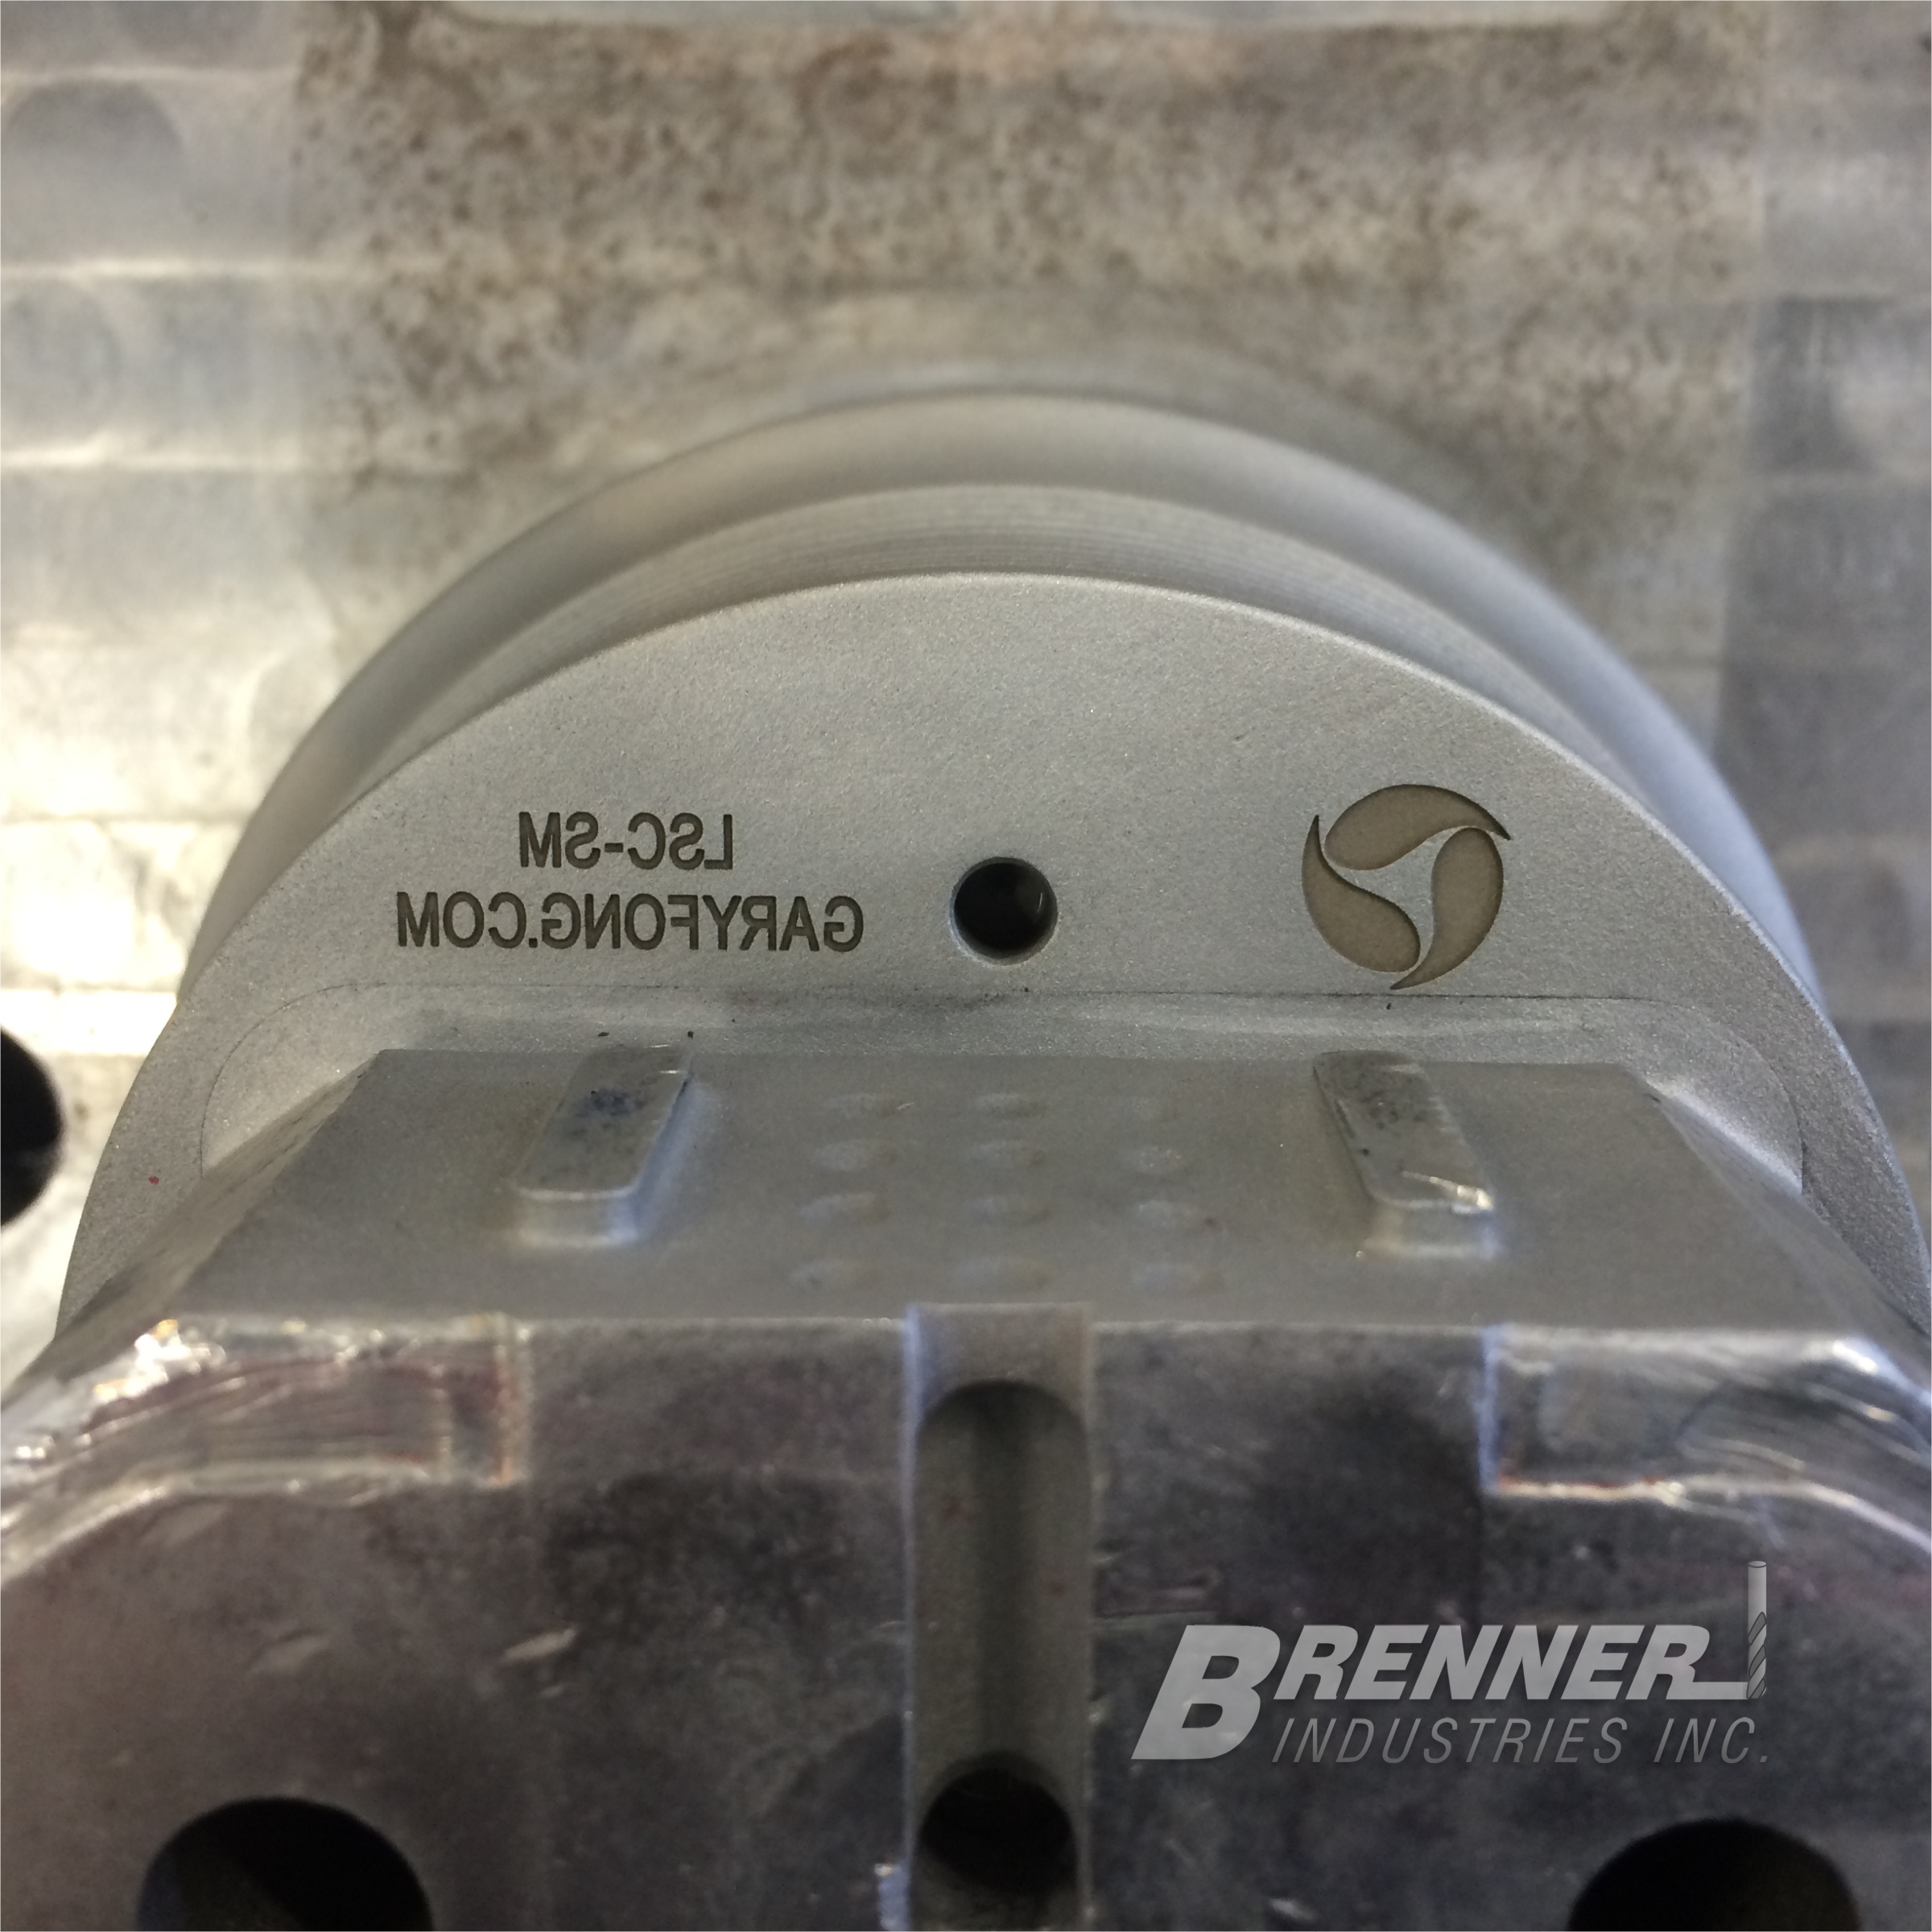 Brenner Industries Industrial Mold Die Tool Stamping Machining Engraving Engravers Service Texture Polish Insert Inserts Components Plastic Injection Forming Metal Working Forging Cast Casting Castings Automotive Firearm Agricultural Cookware Marking Identification ID I.D. Part Number Logo Revision Brand Branding OEM Artwork Vector Company OEM O.E.M. Manufacturing Manufacturers Association Guild CNC EDM mill milling milled Hardened tool steel CMP PM A2 D2 S7 M4 A-2 D-2 S-7 M-4 DC-53 DC53 rapid ton tonne tonnage press draw blank blanking tooling production high multiple cavity revision core pin pins ejector instruction instructions communication communications words cutting cutter cutters hardmilling aluminum brass metal steel copper bronze work workers USA U.S.A. Milwaukee Wisconsin WI MKE Journeyman CAD CAM MasterCAM SolidWorks Master Solid 3D three dimensional modeling model direct